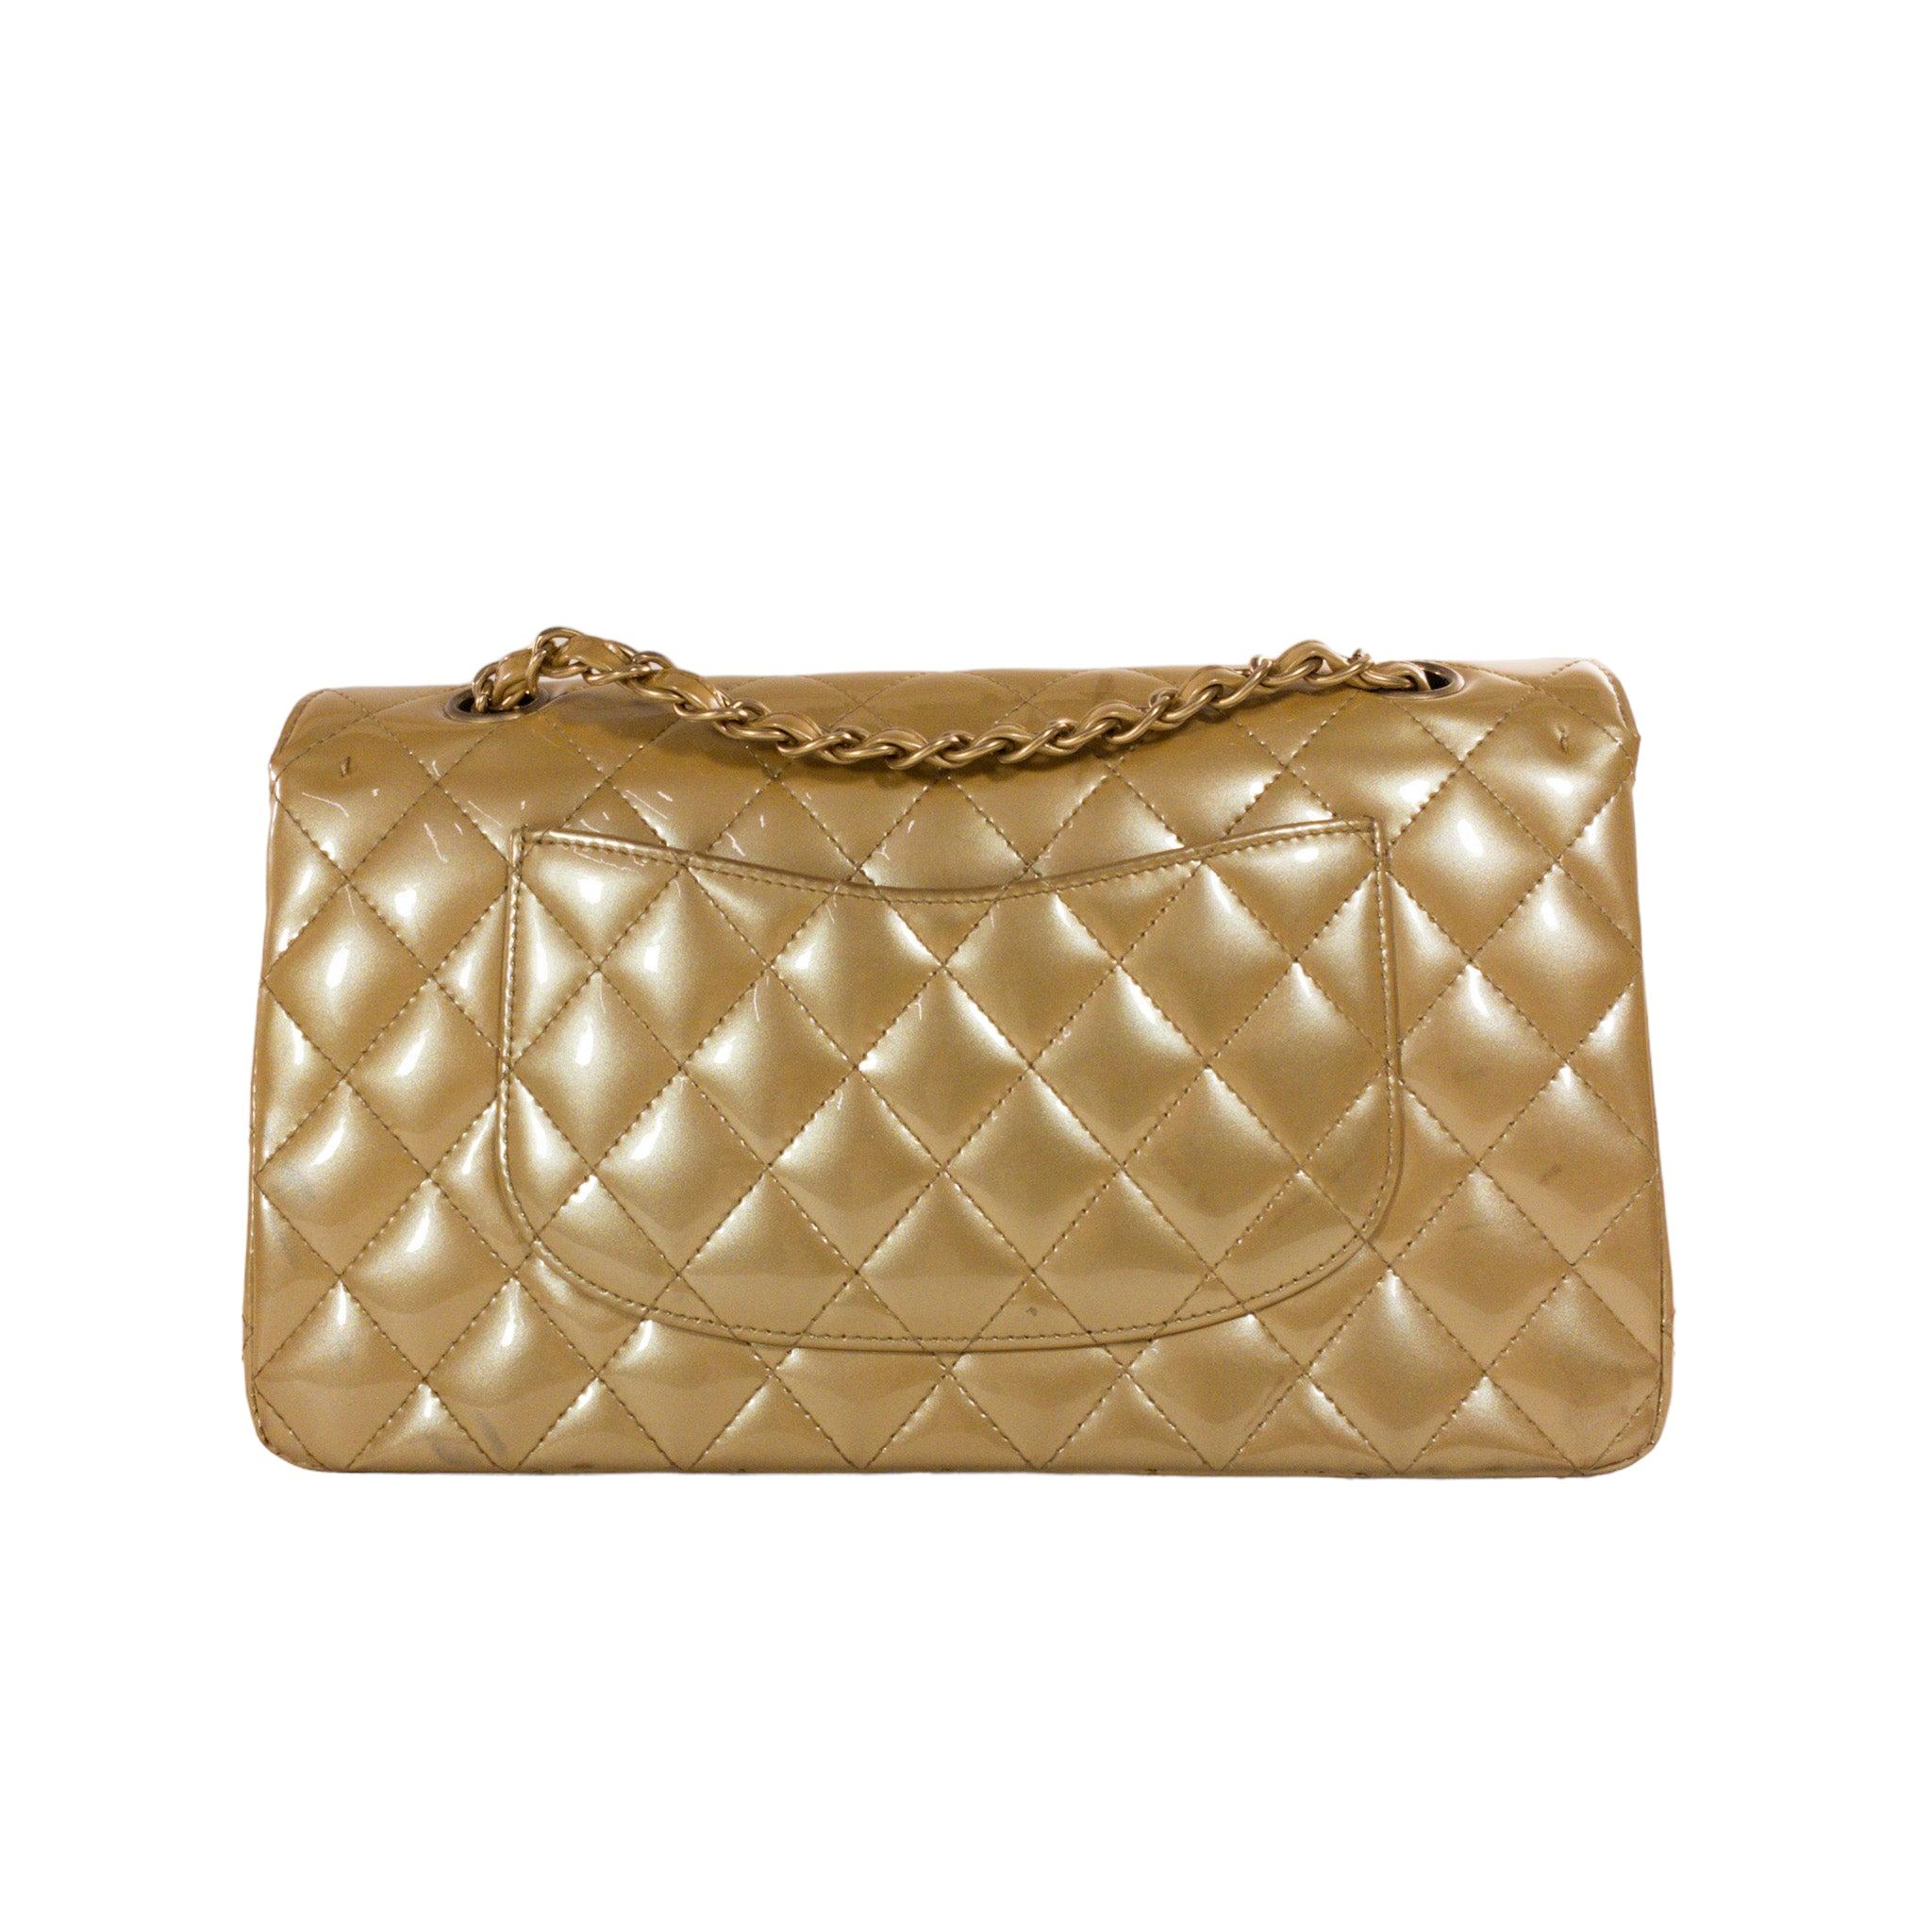 Chanel Gold Patent Medium Flap GHW Bag

This is an authentic Chanel Medium Classic Flap in beige patent leather. The bag has a flap closure with a Double C logo turn lock. The interior is leather and includes one slip pocket and one zip pocket, it